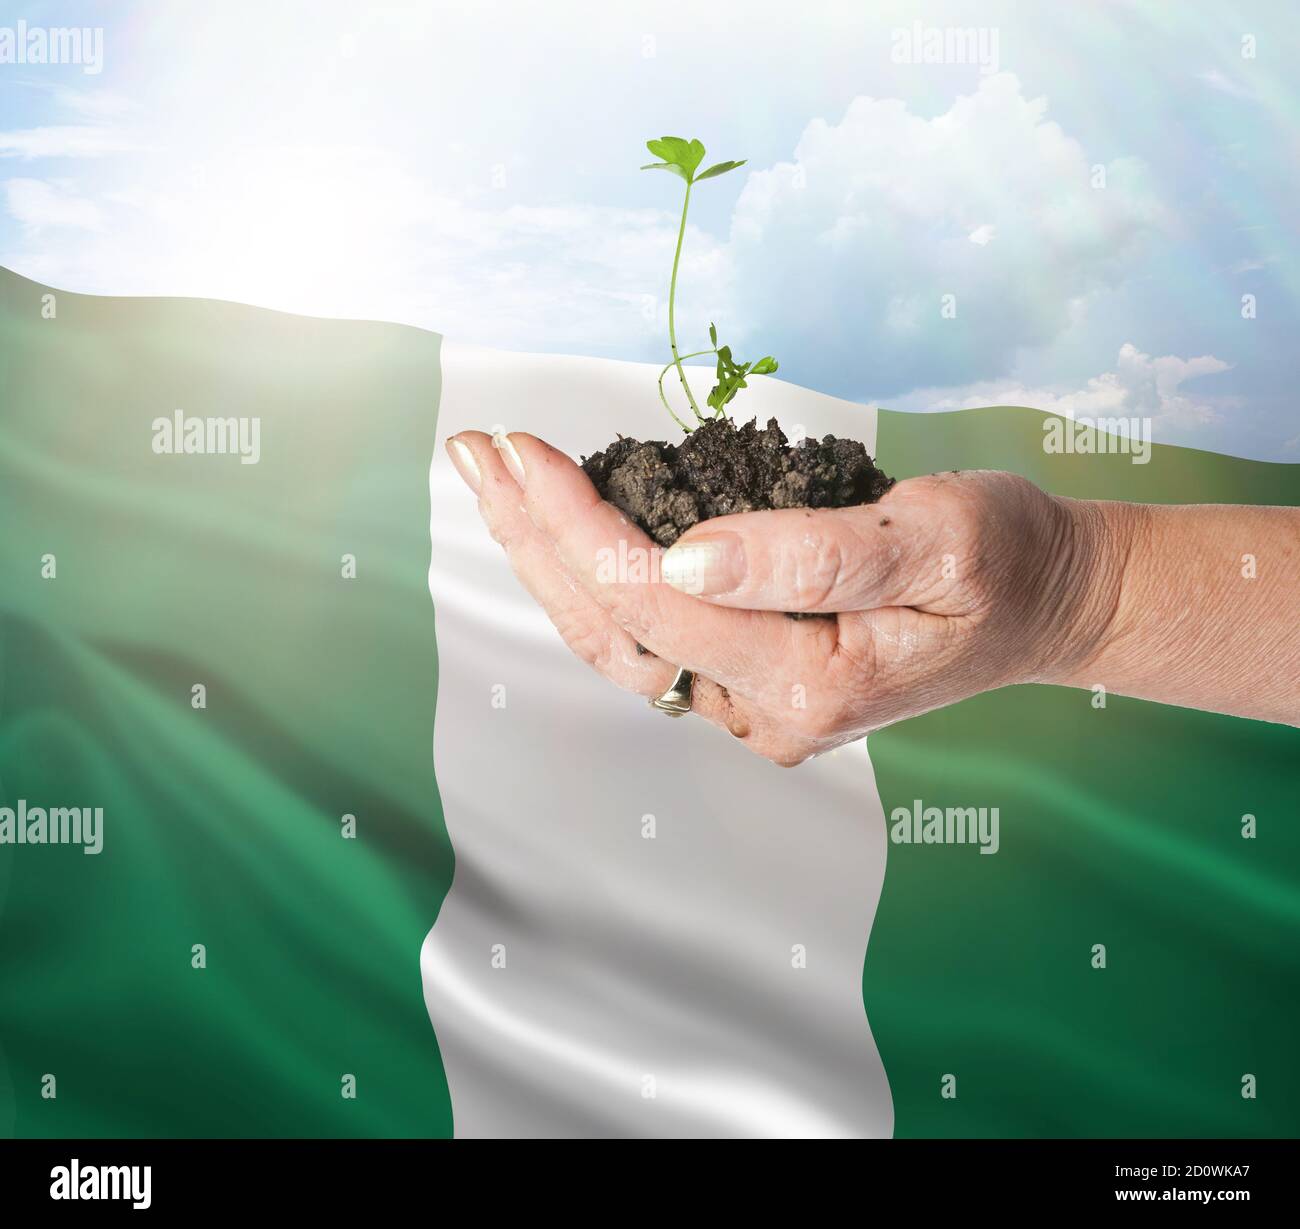 Nigeria growth and new beginning. Green renewable energy and ecology concept. Hand holding young plant. Stock Photo